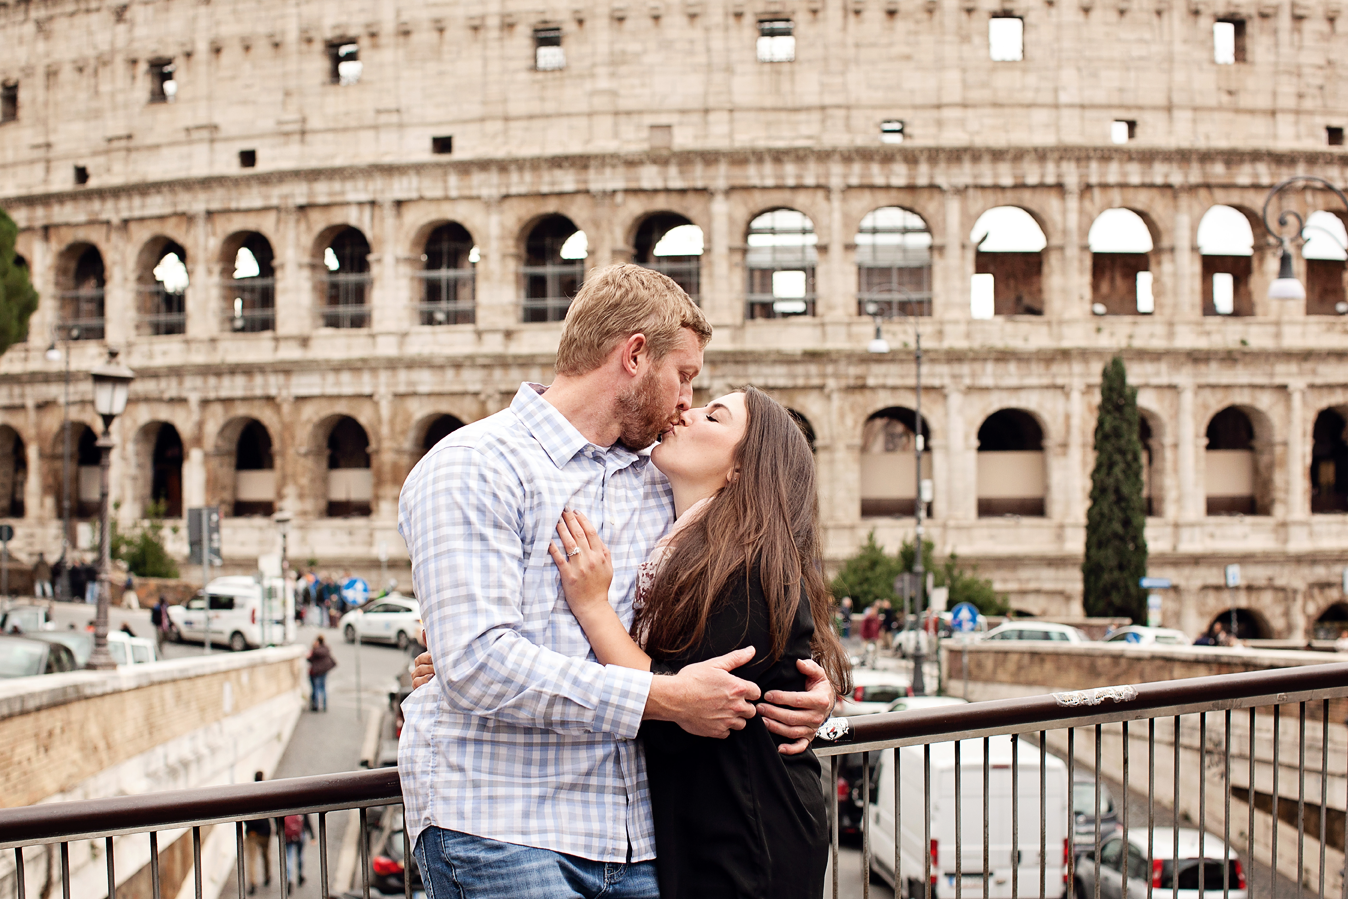 She said yes at the colosseum